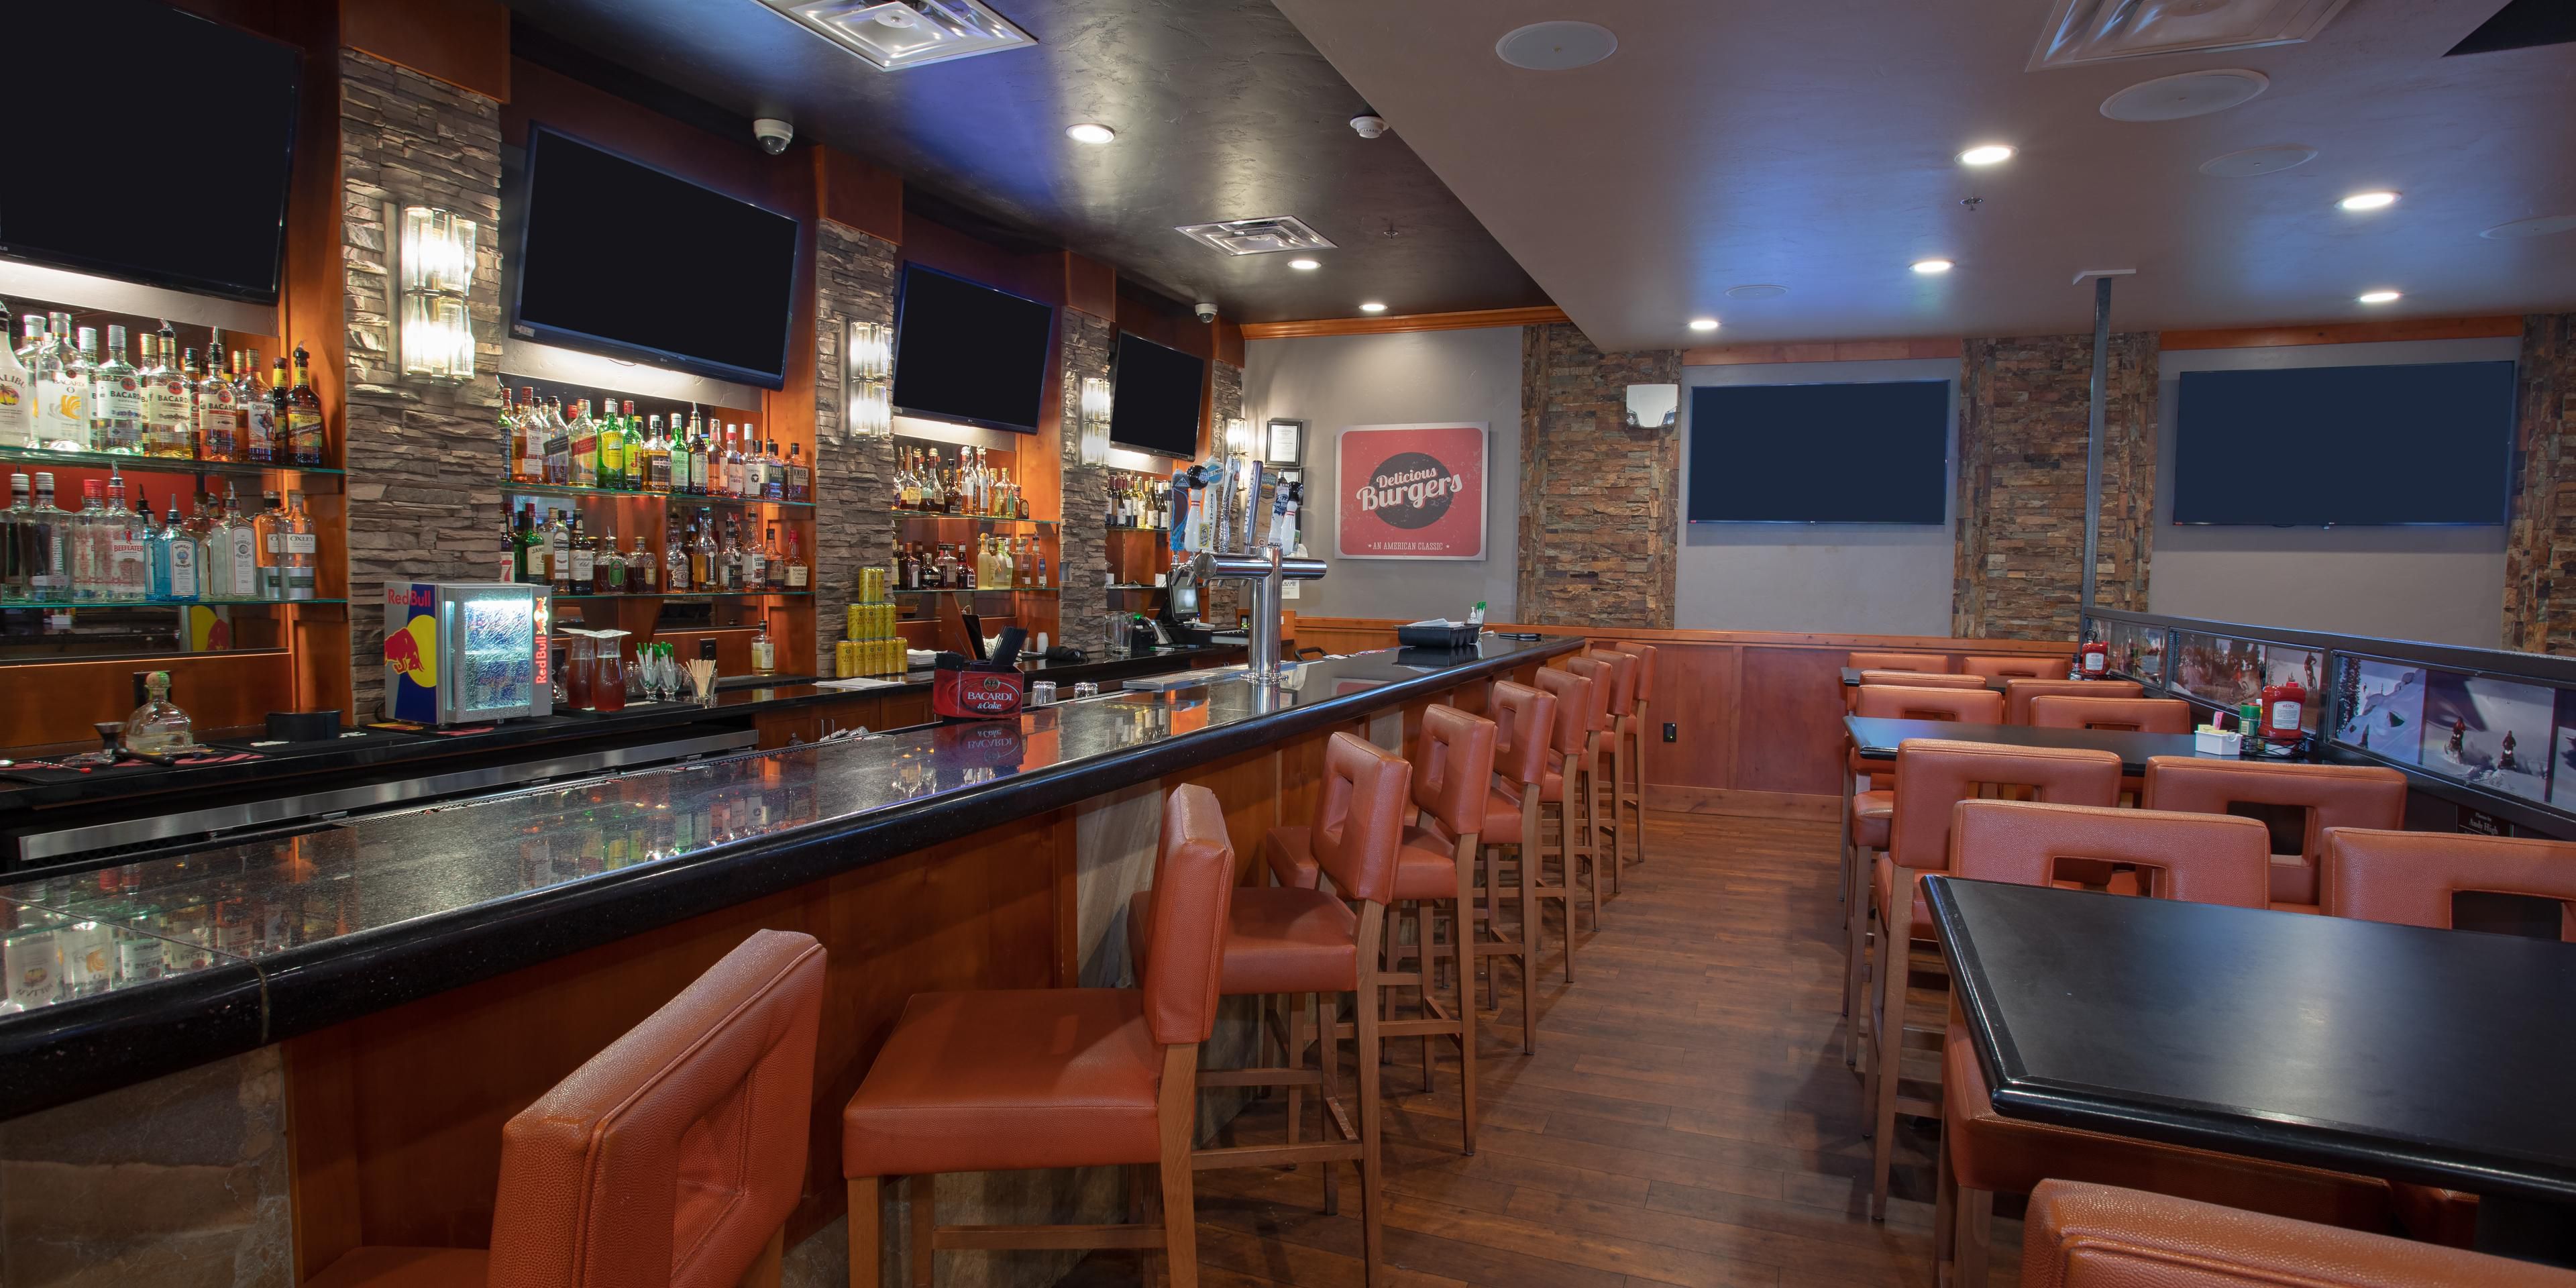 Enjoy our full bar with many large screens to catch the big game.